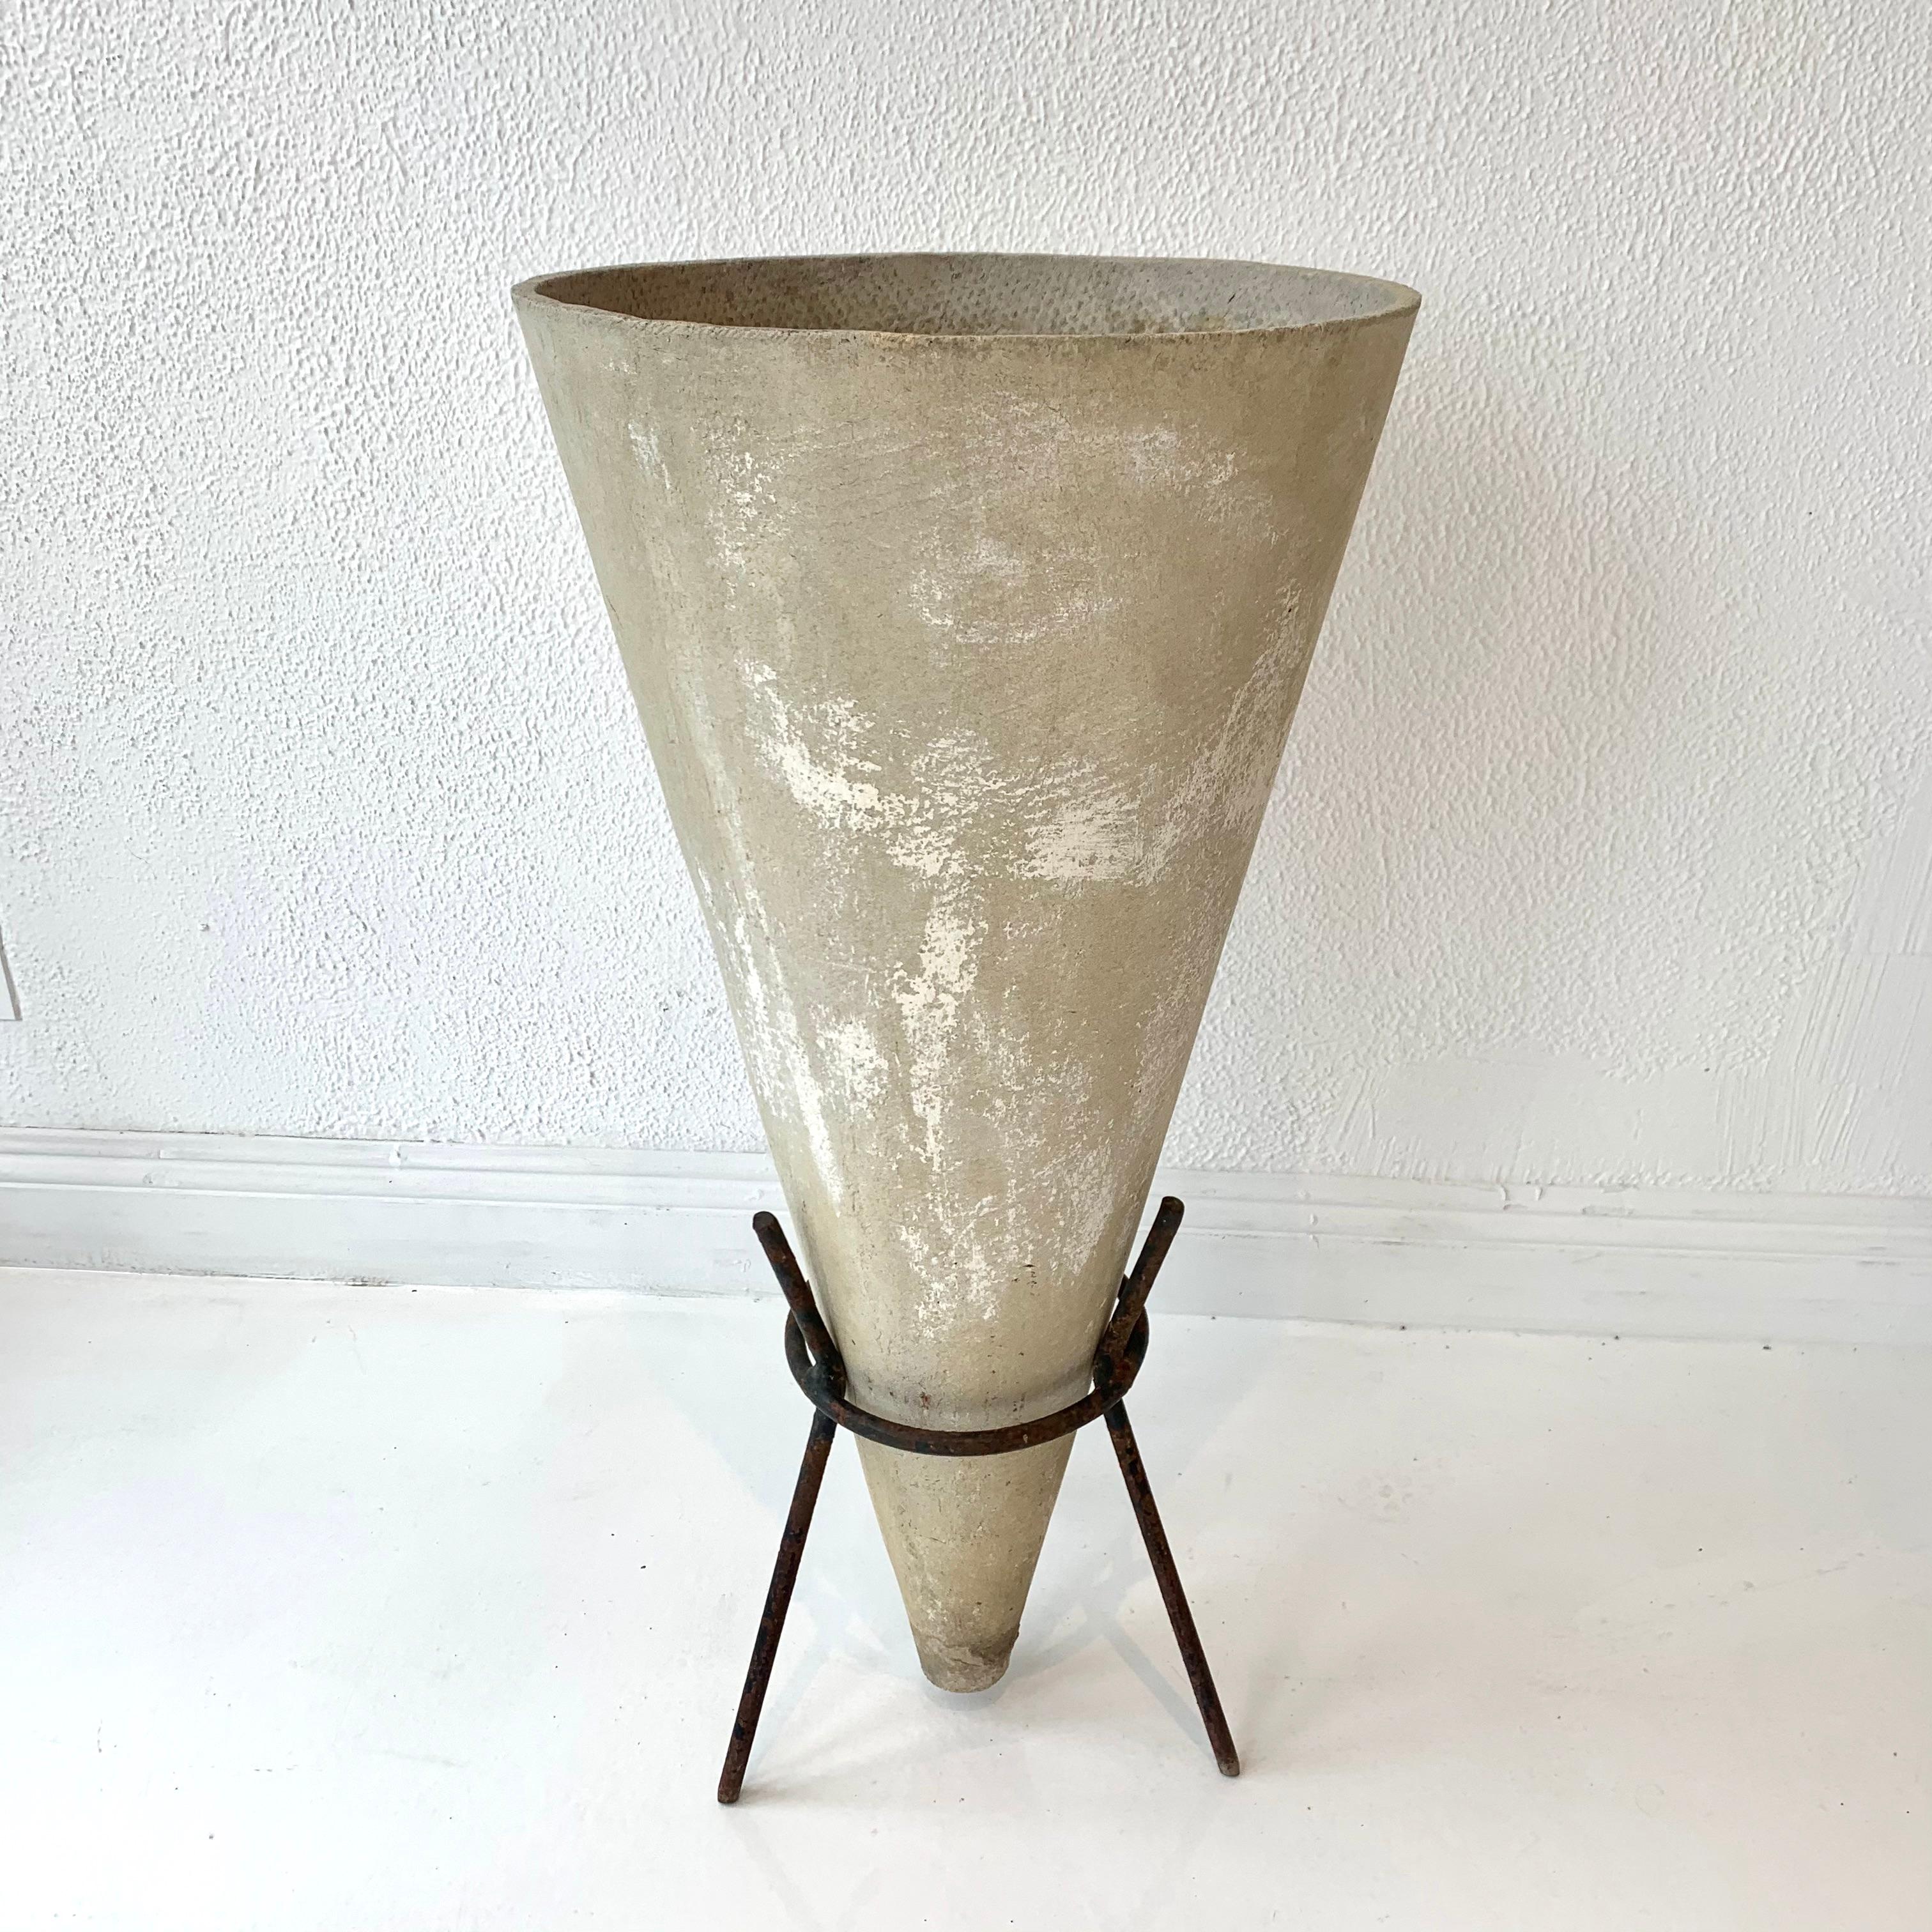 Willy Guhl Concrete Cone Planter on Iron Stand 1